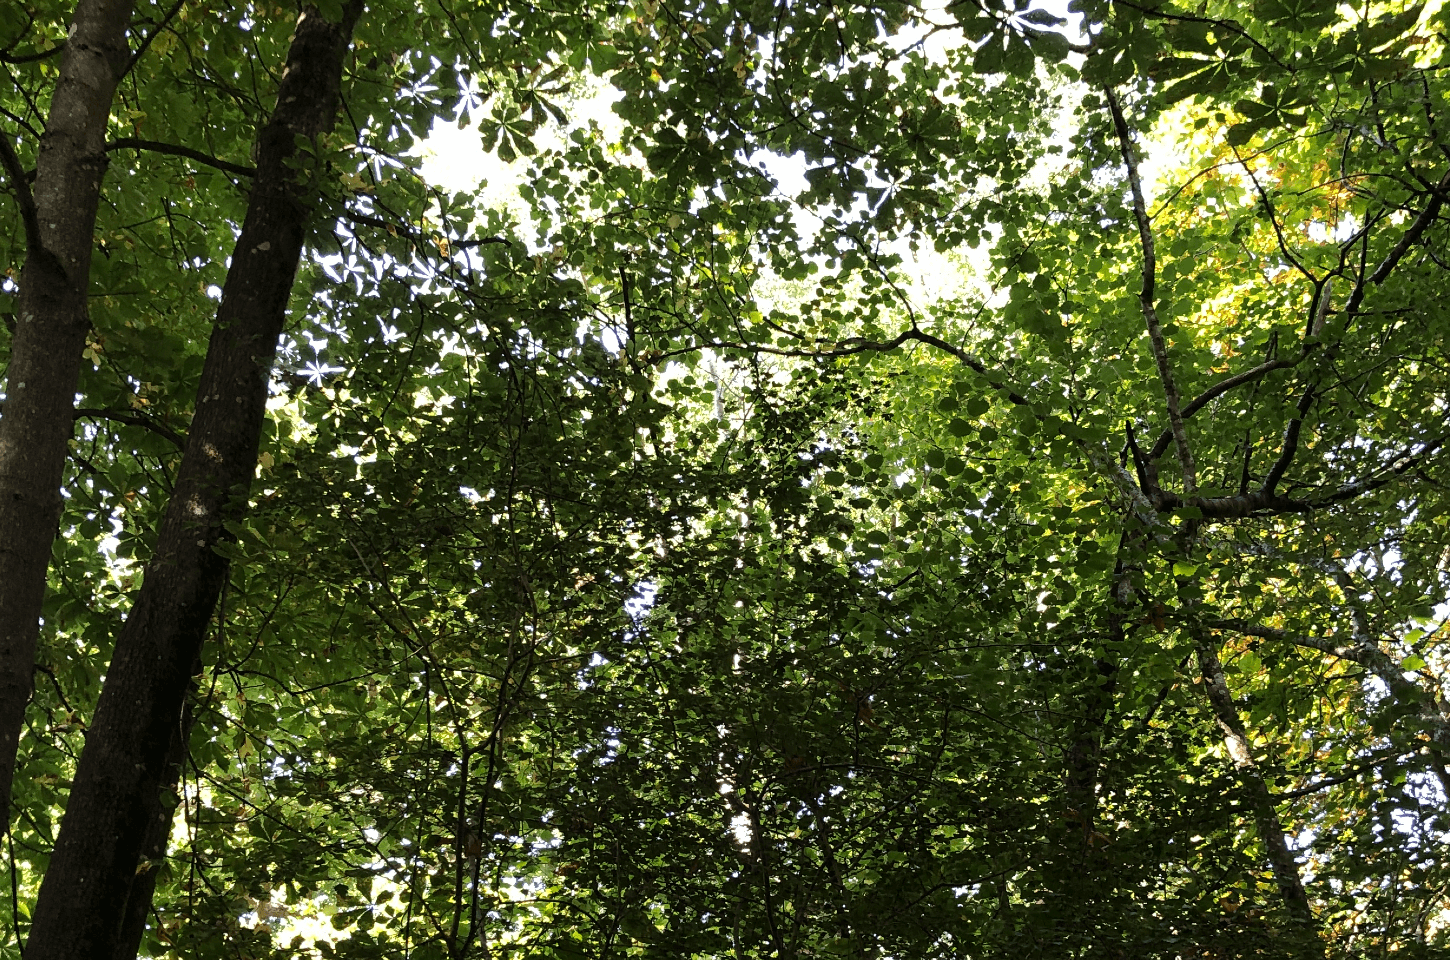 Forest Bathing in New England Wood, Cuckfield